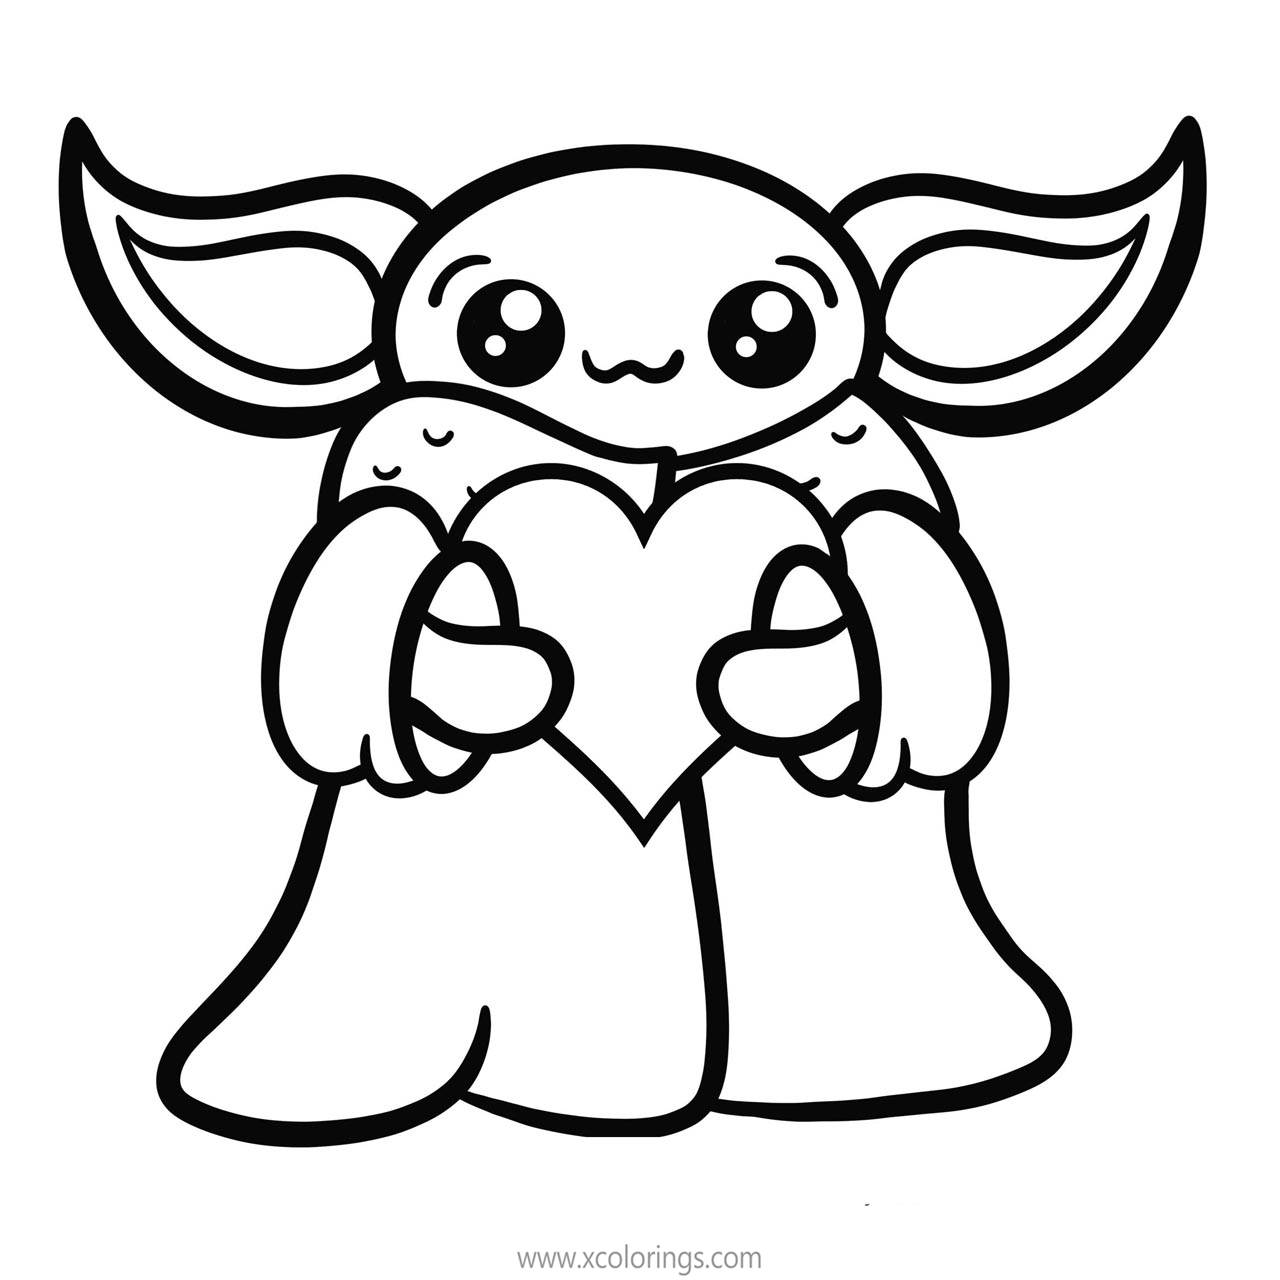 coloring-pages-of-baby-yoda-free-download-gambr-co